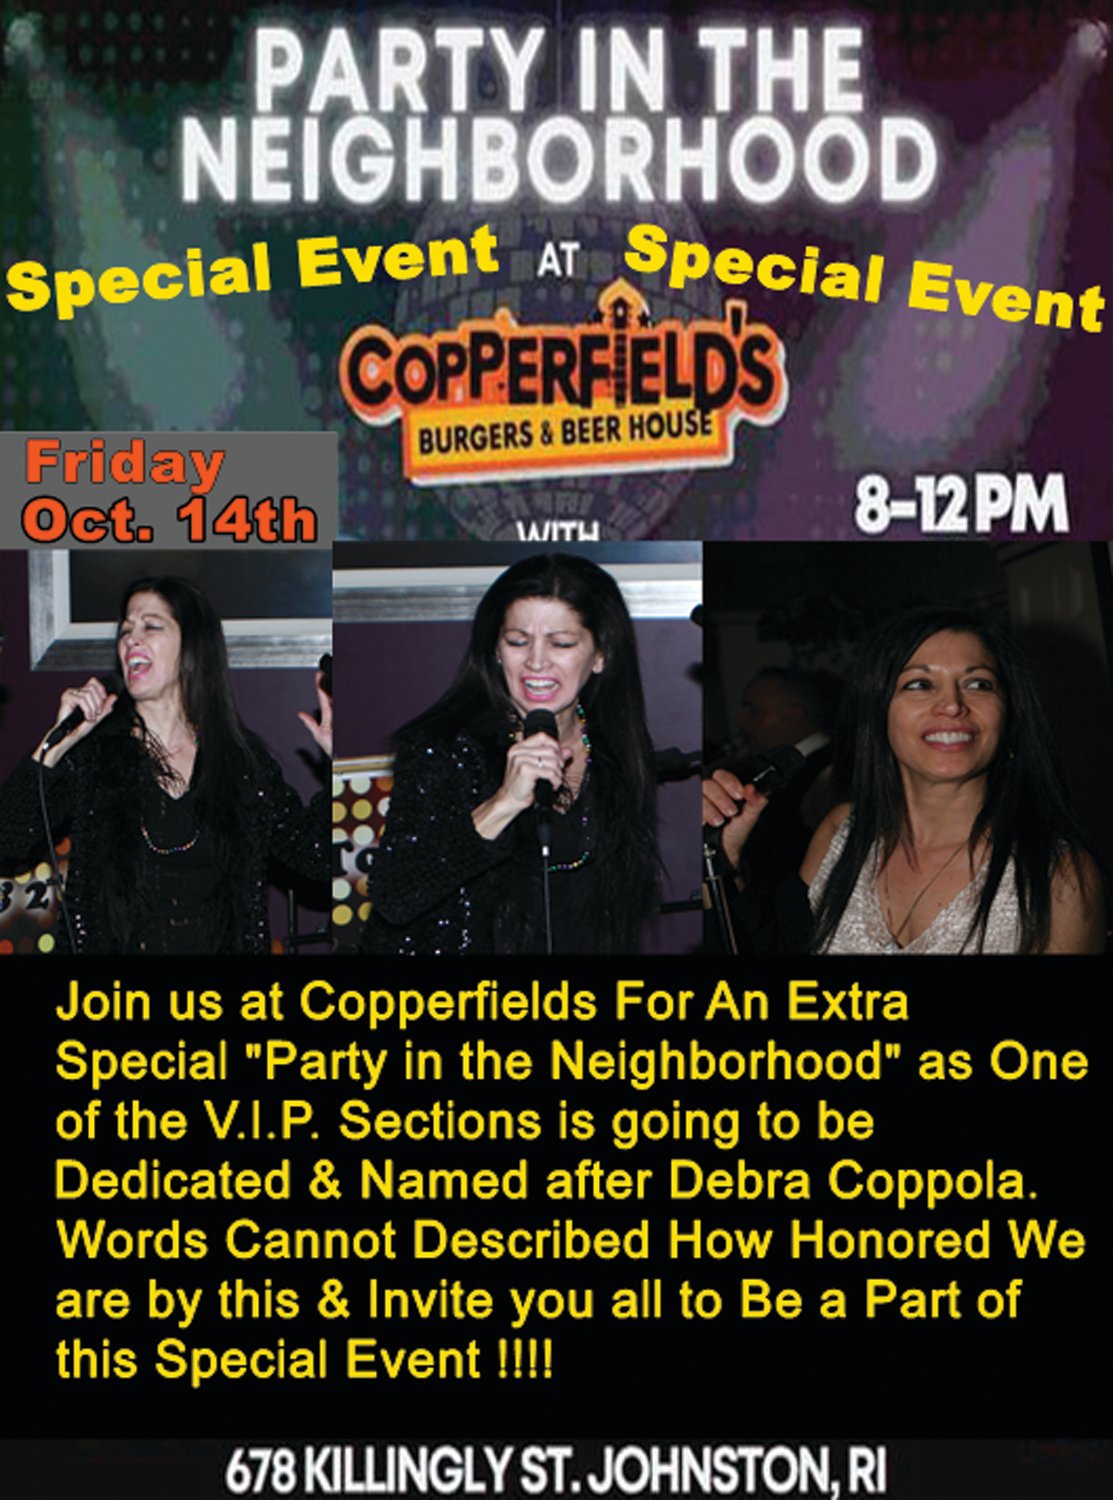 MAIN EVENT: Next Friday night, Copperfield’s Burger & Beer, at 678 Killingly St. in Johnston, is having a “Special Event” and paying tribute to Debra Coppola, lead vocalist for the band 2nd To None.